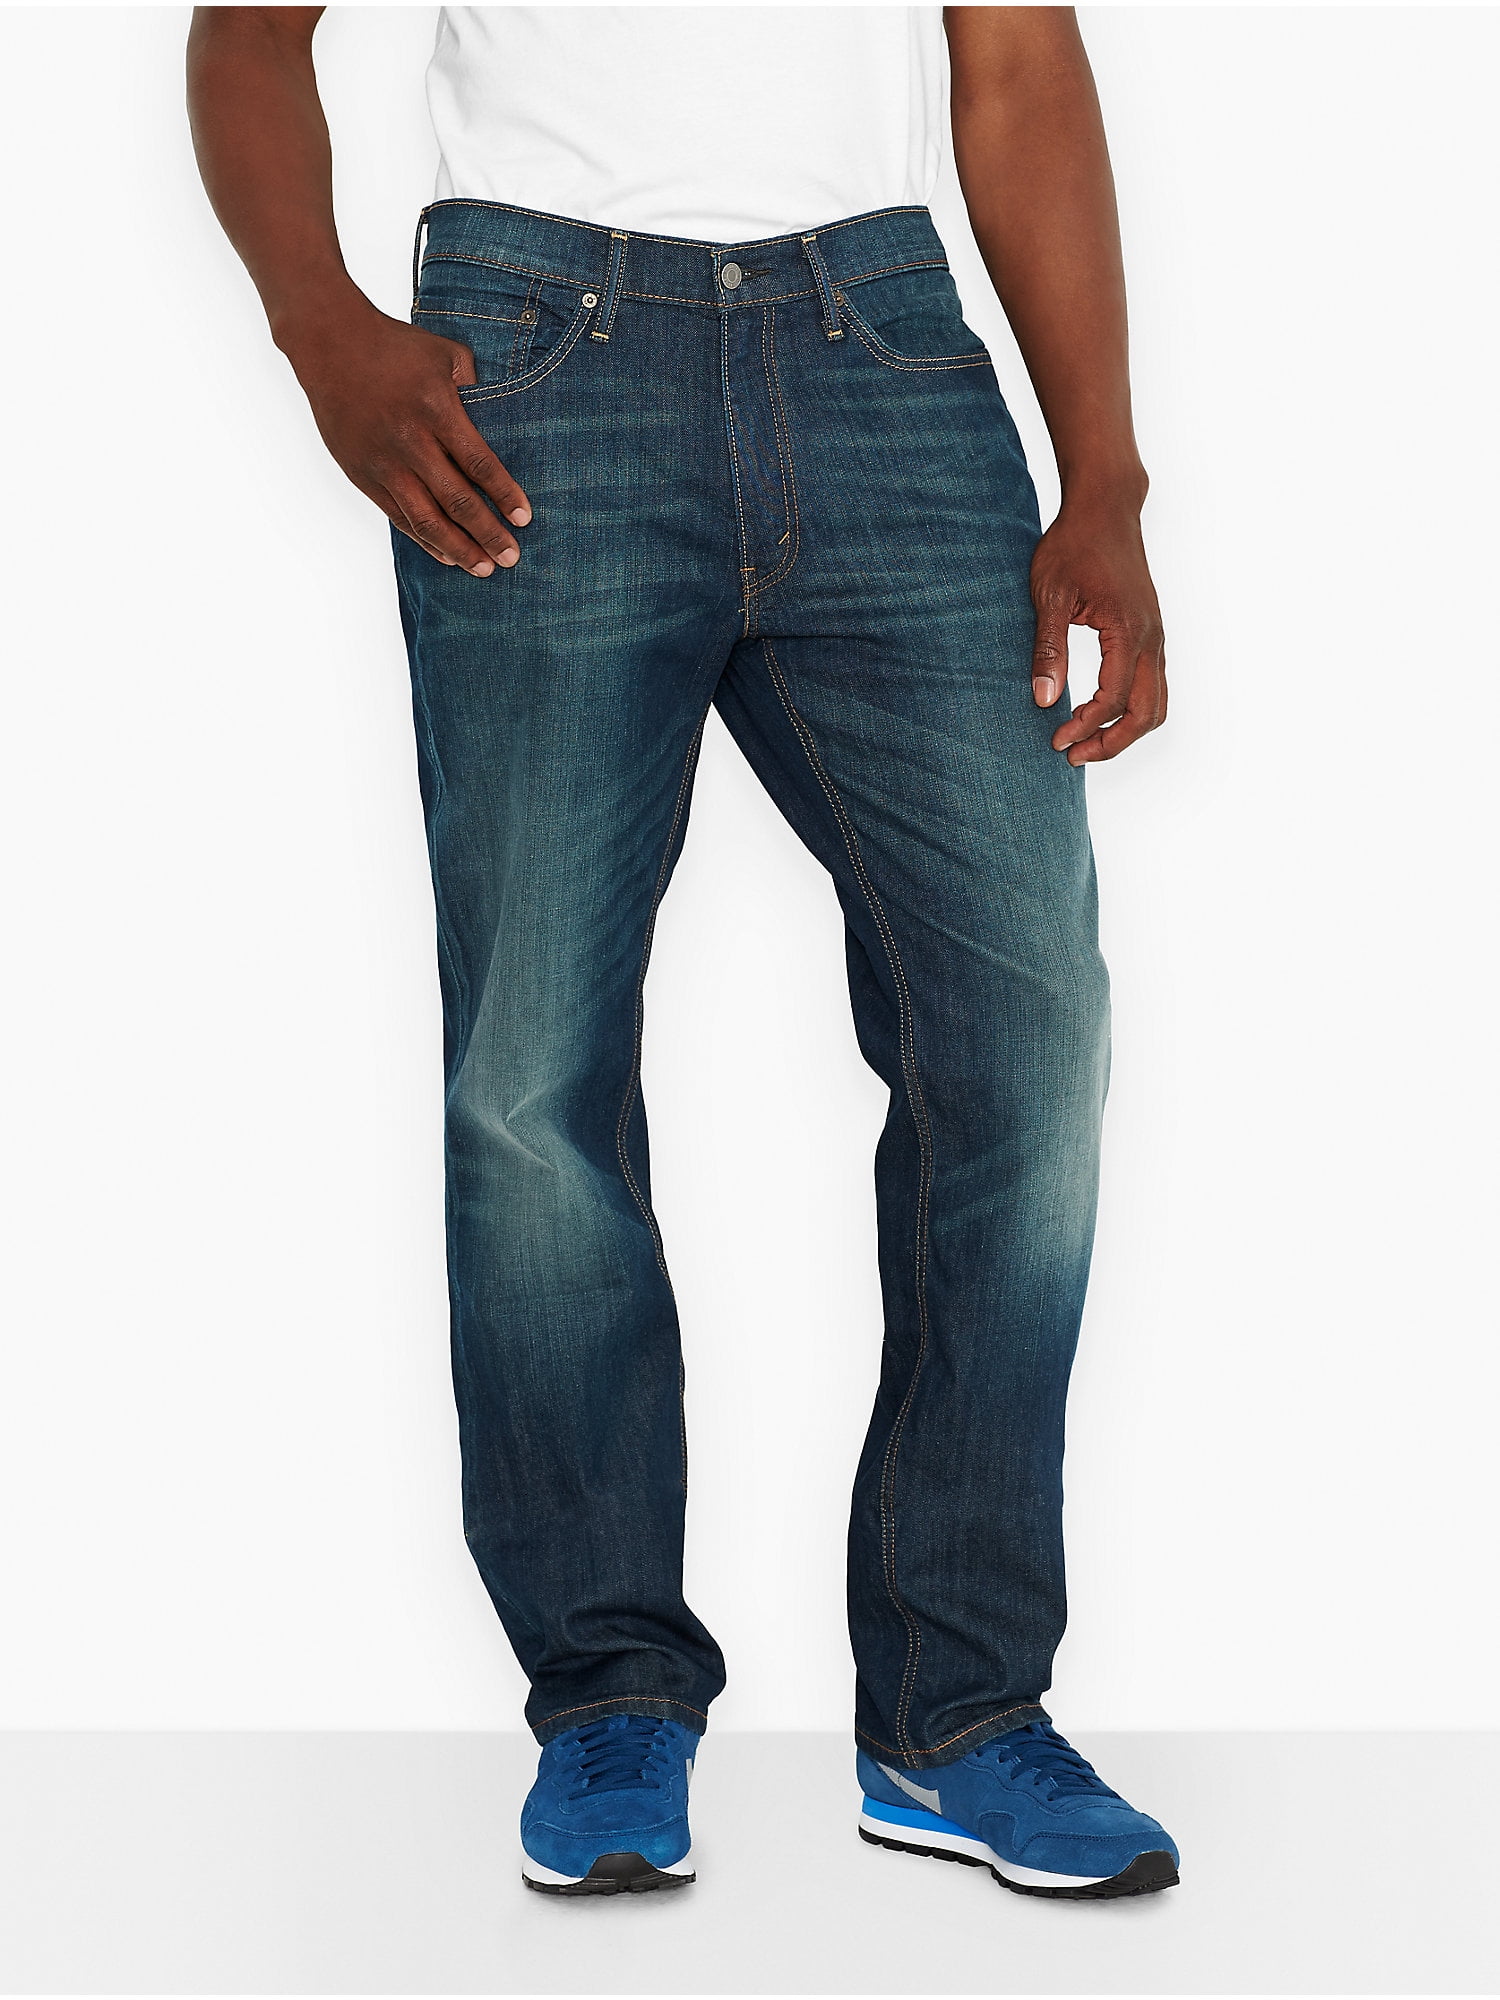 levi's 541 athletic fit big and tall